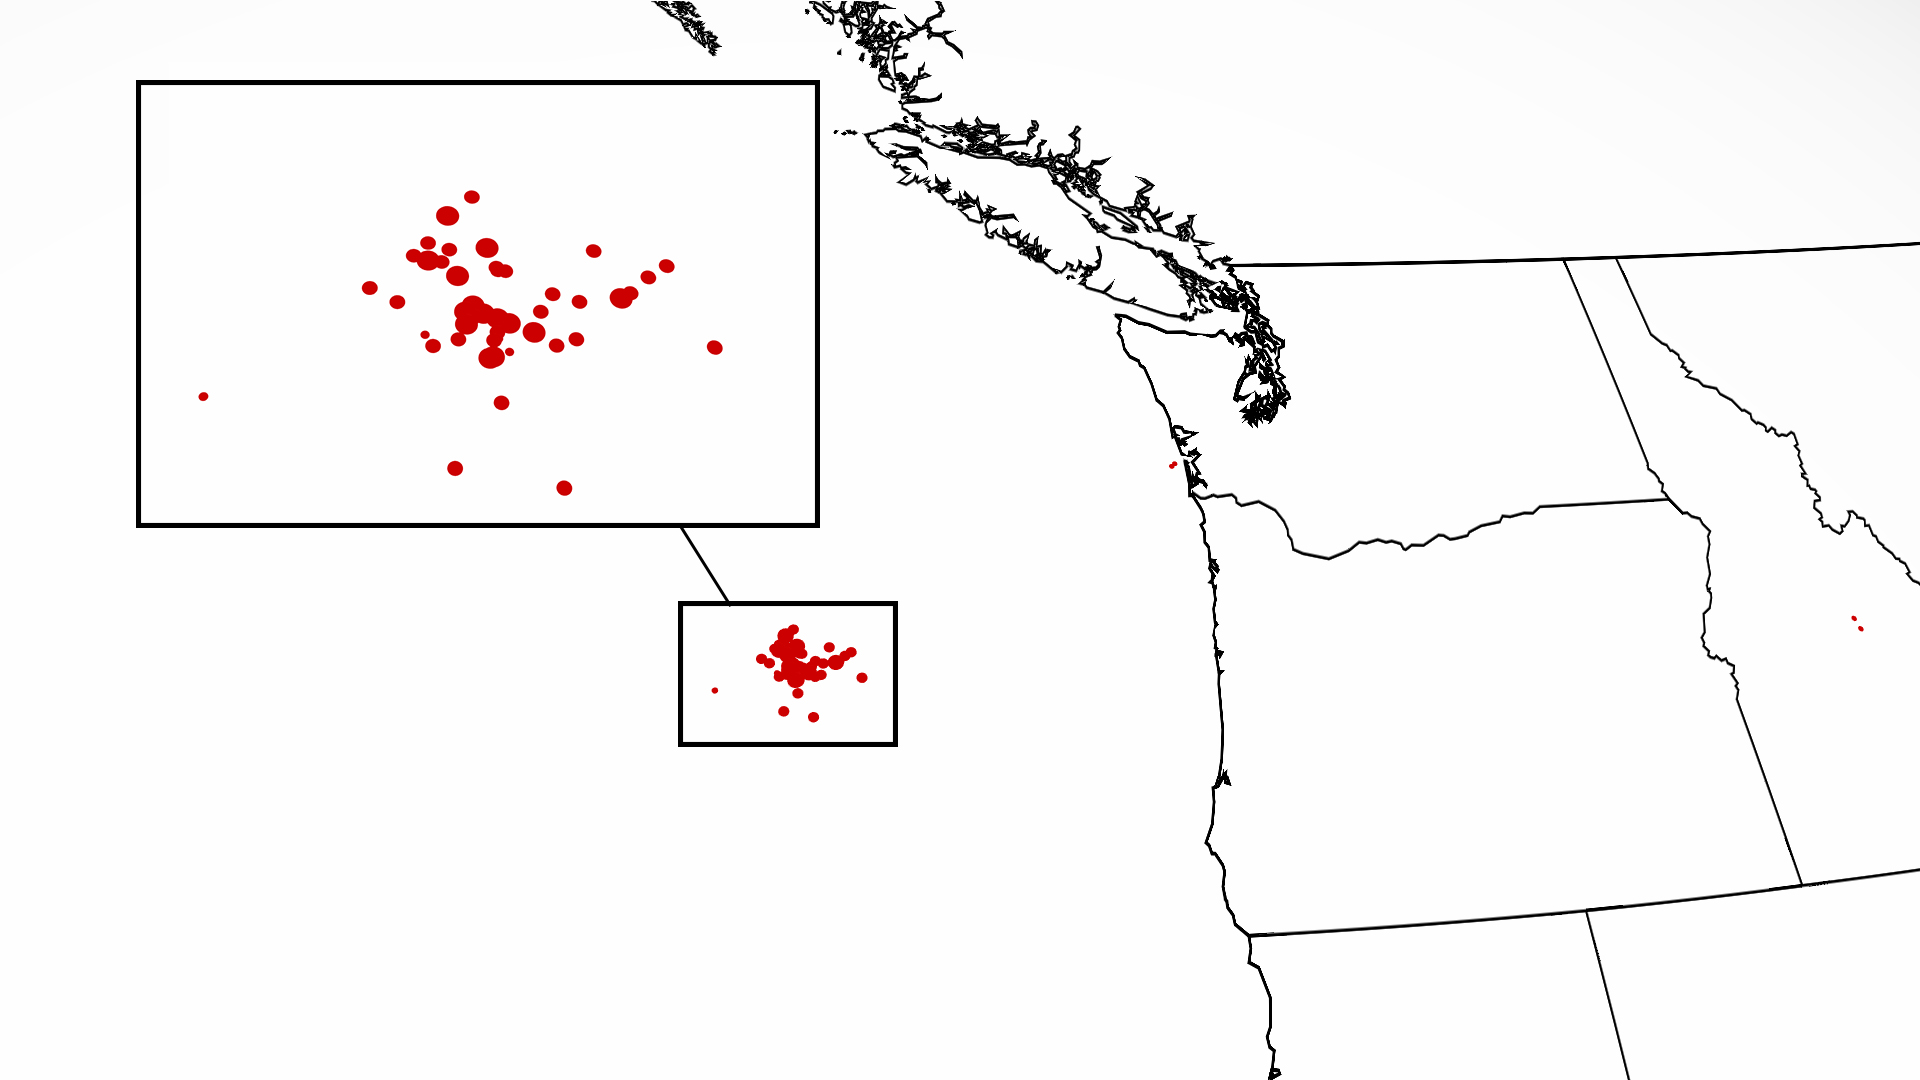 Swarm Of More Than 40 Earthquakes In 24 Hours Causing A Buzz In Northwest US